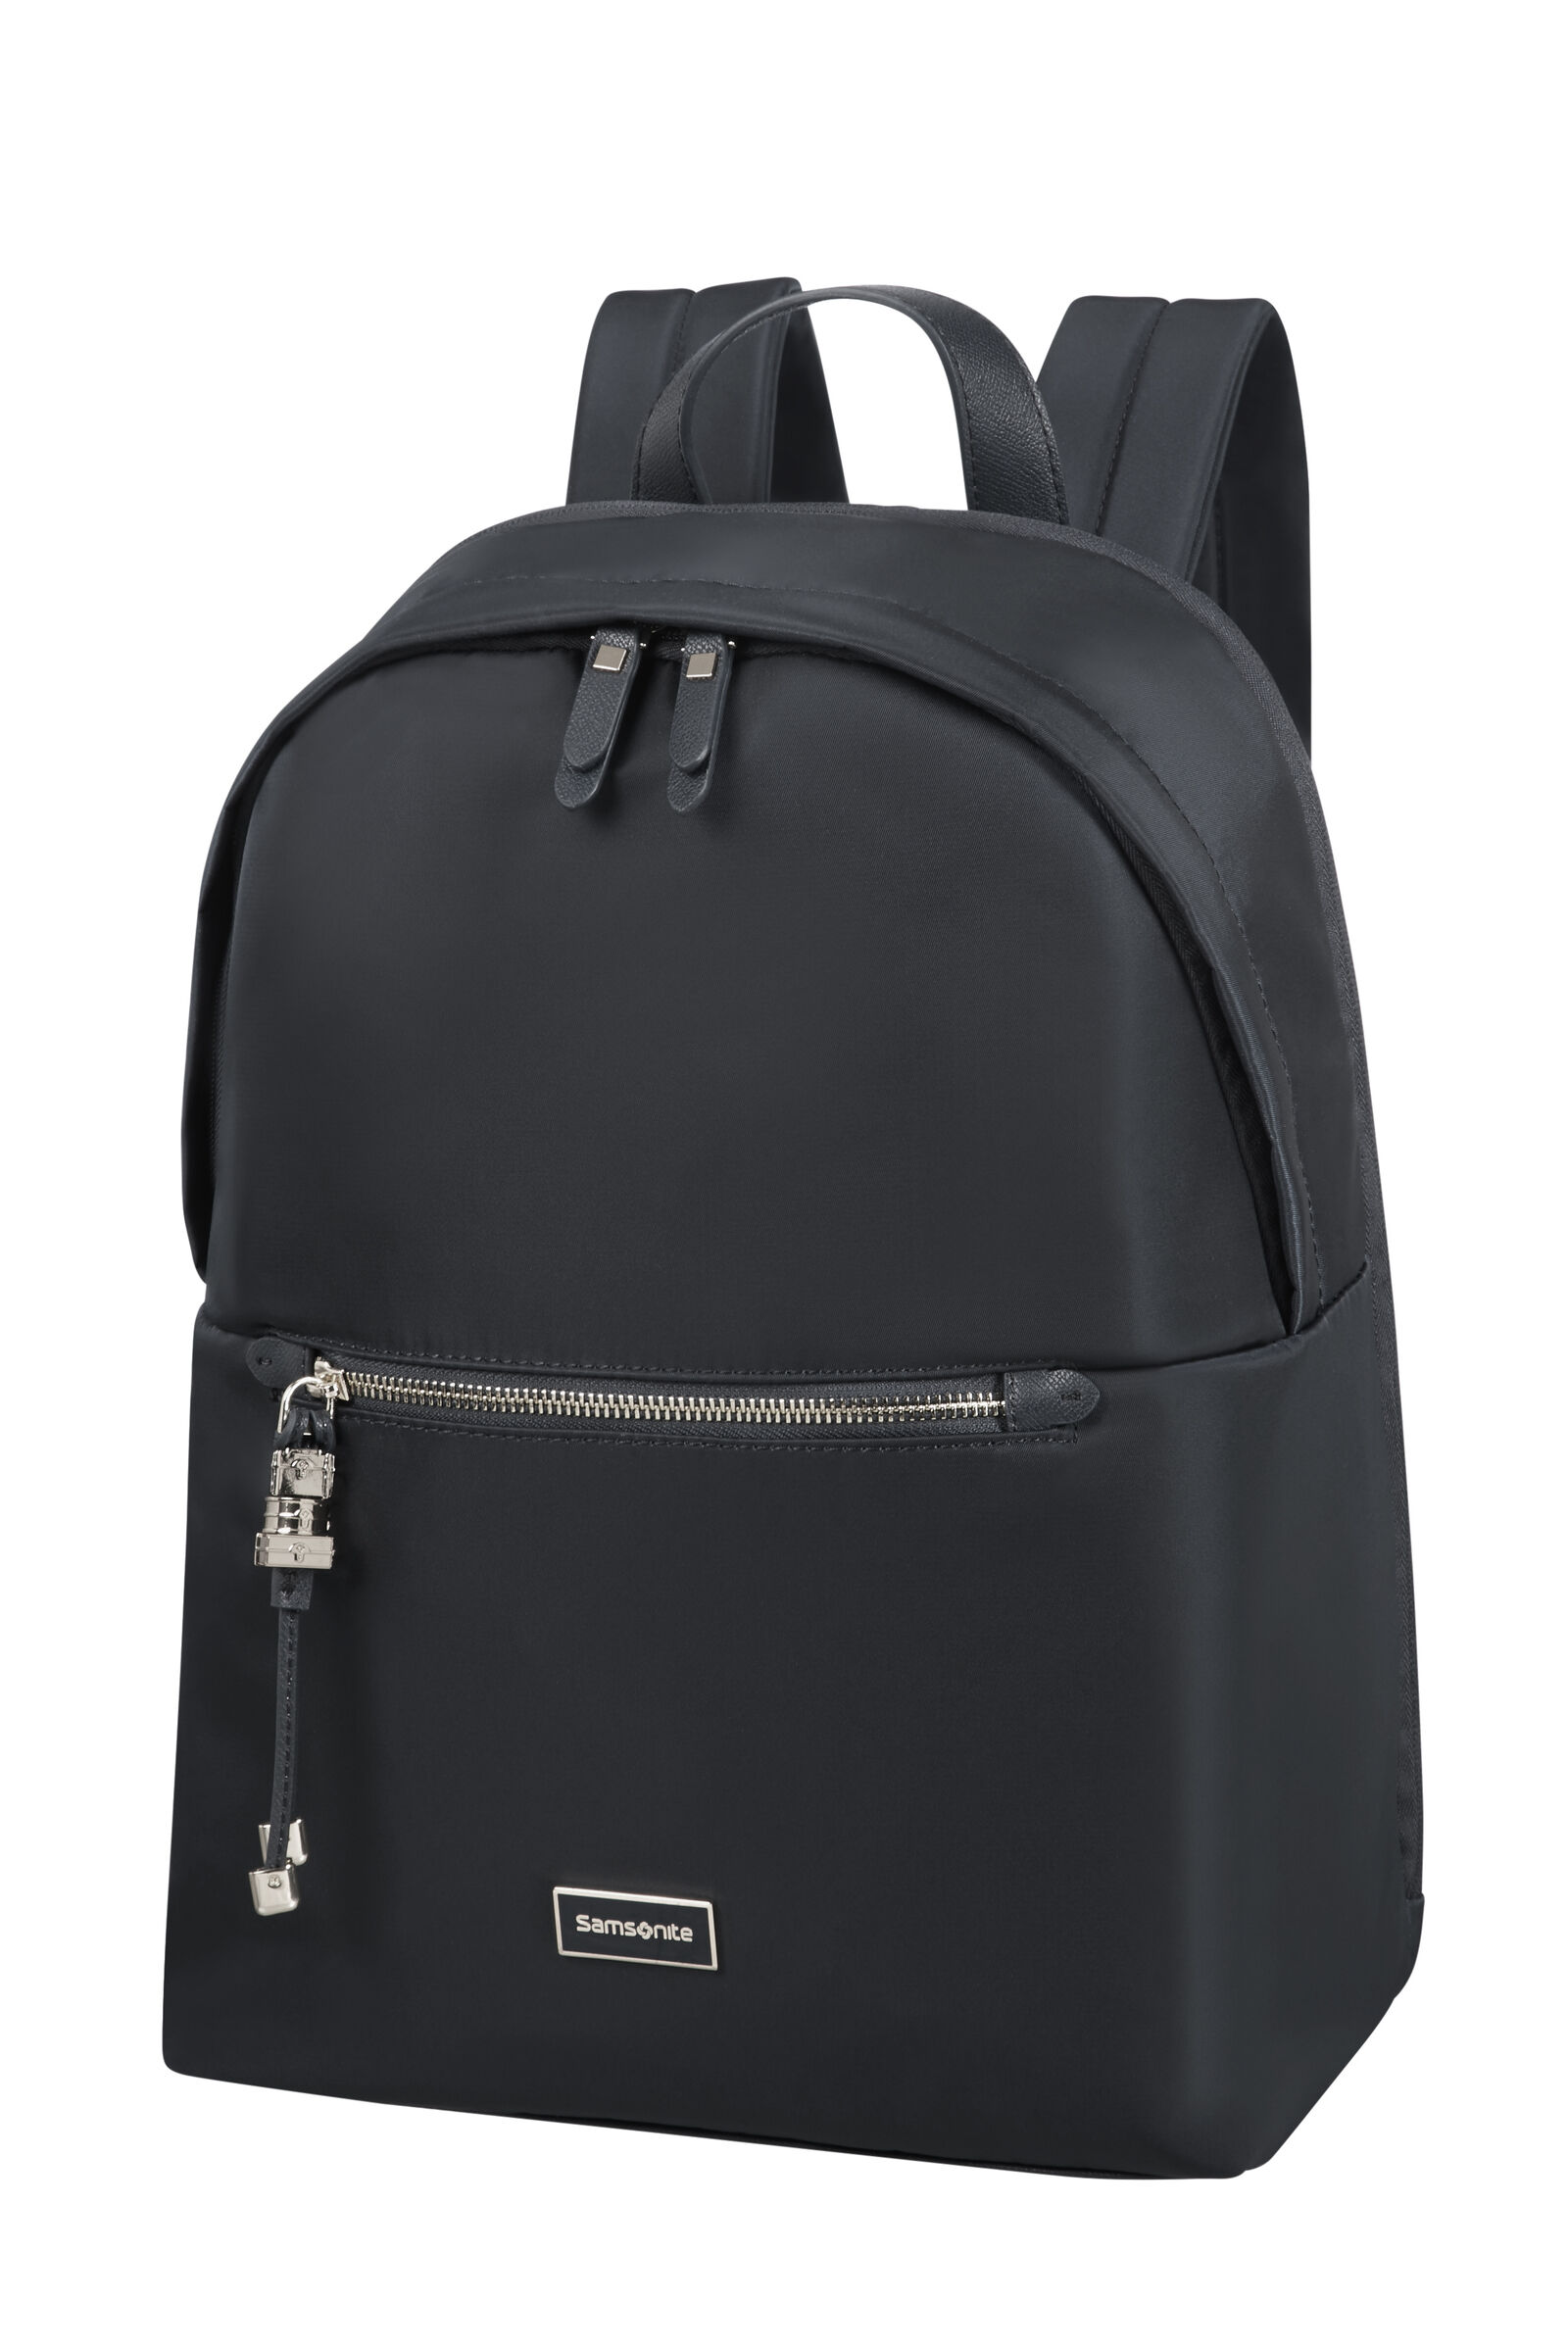 Samsonite Pro DLX 5 laptop backpack 17.3 inches expandable